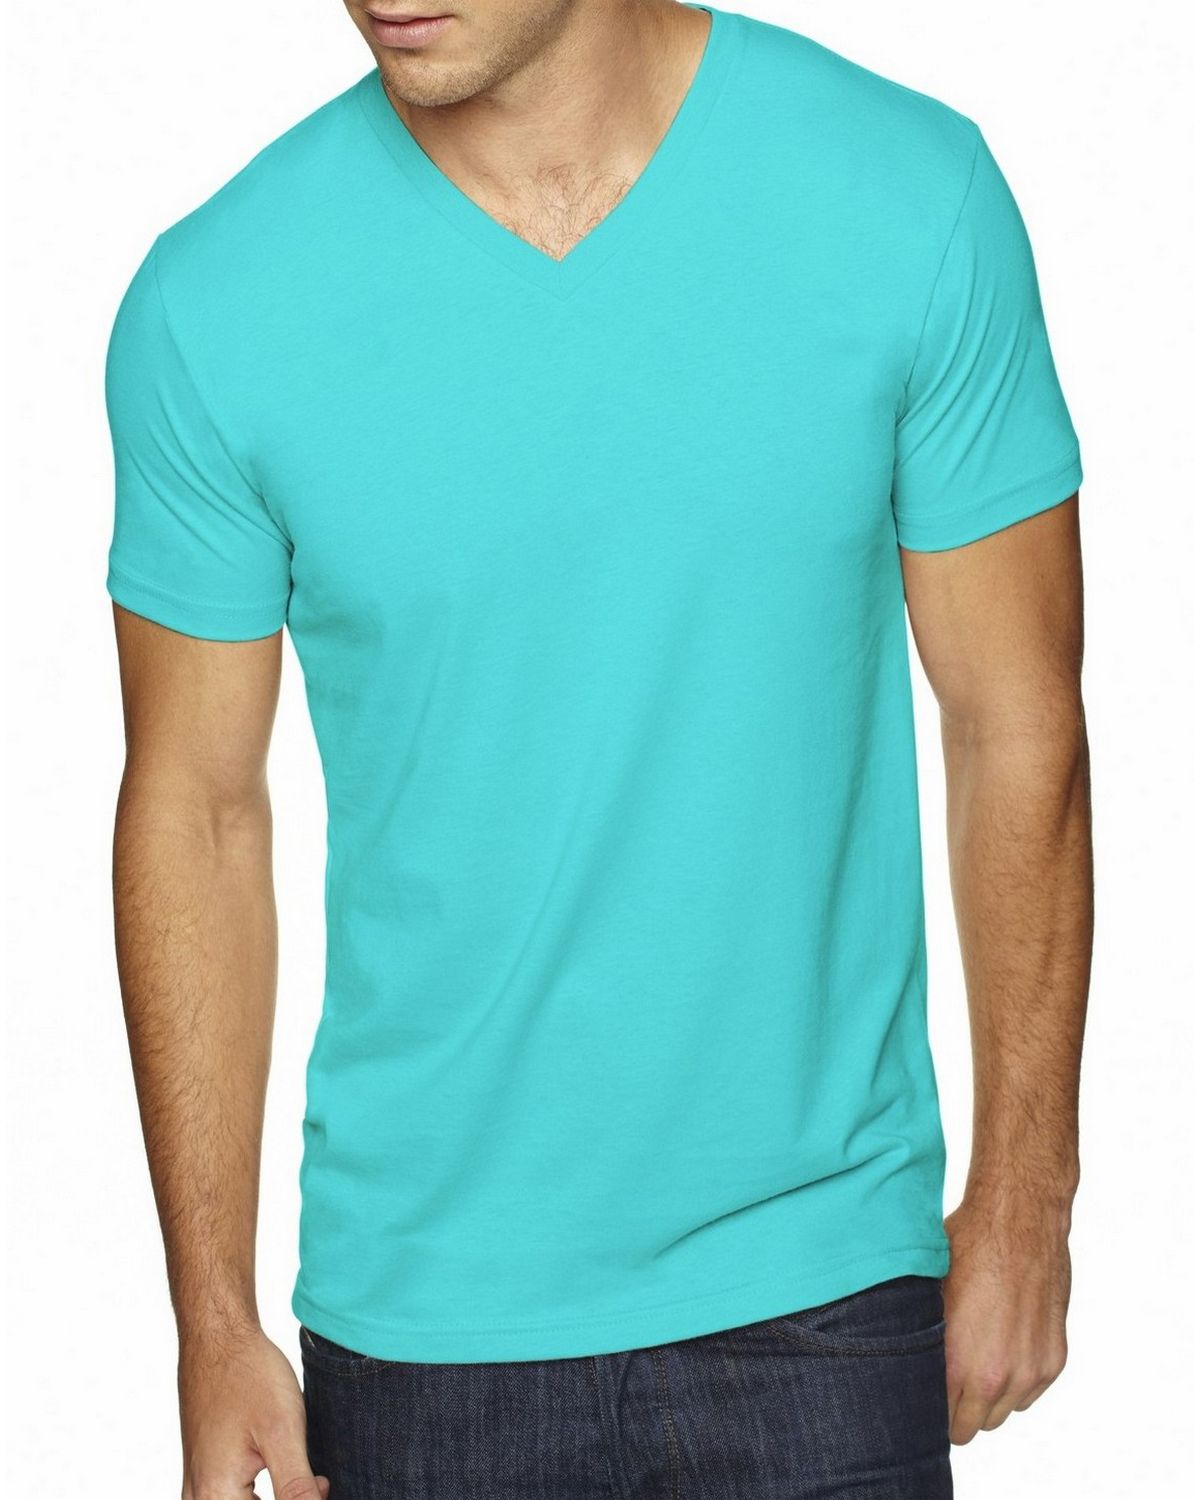 Next Level 6440 Mens Premium Fitted Sueded V-Neck Tee